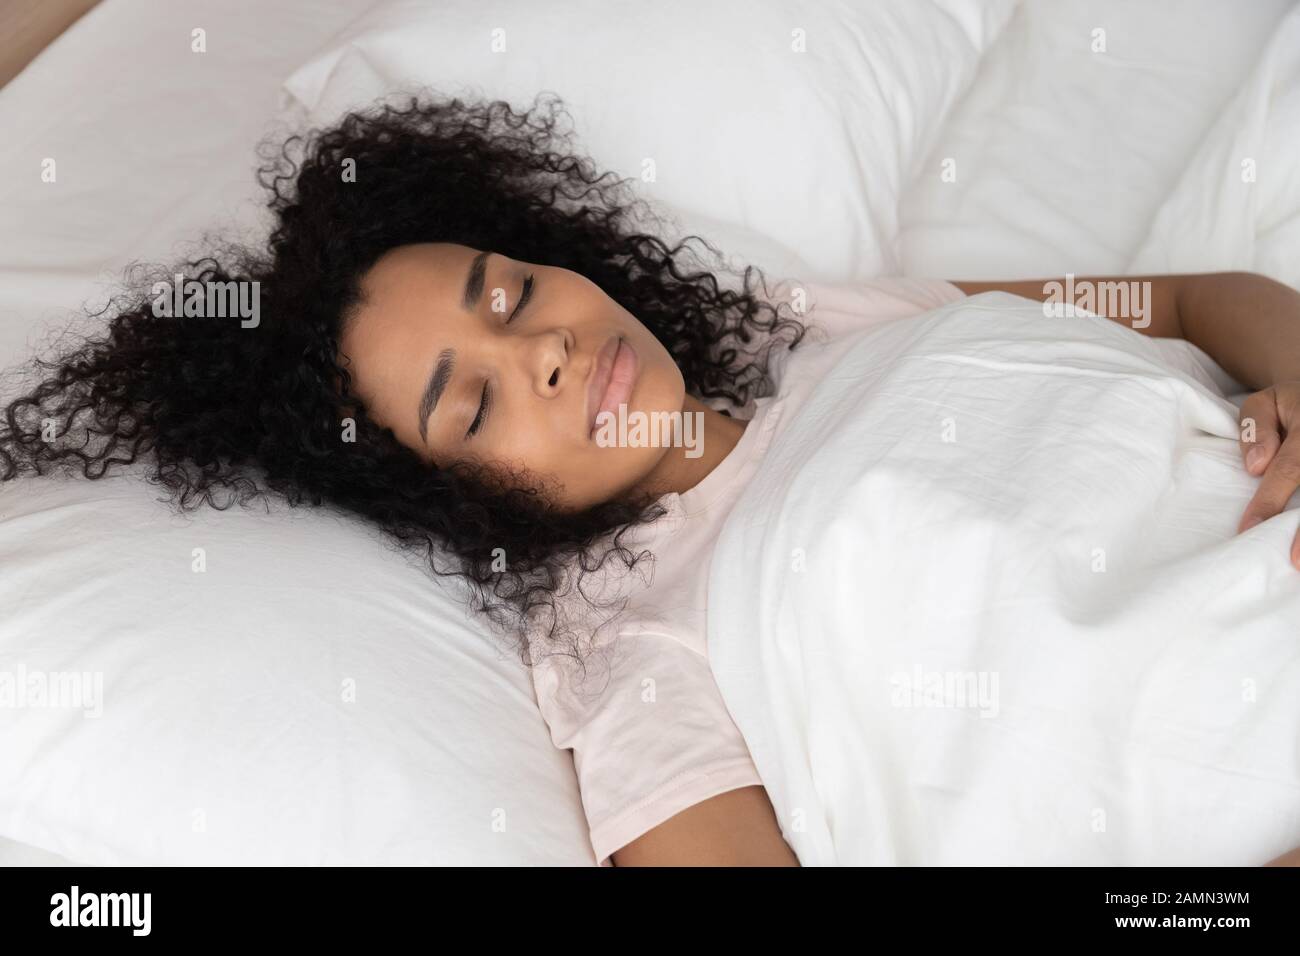 African woman sleeping in bed close up view Stock Photo